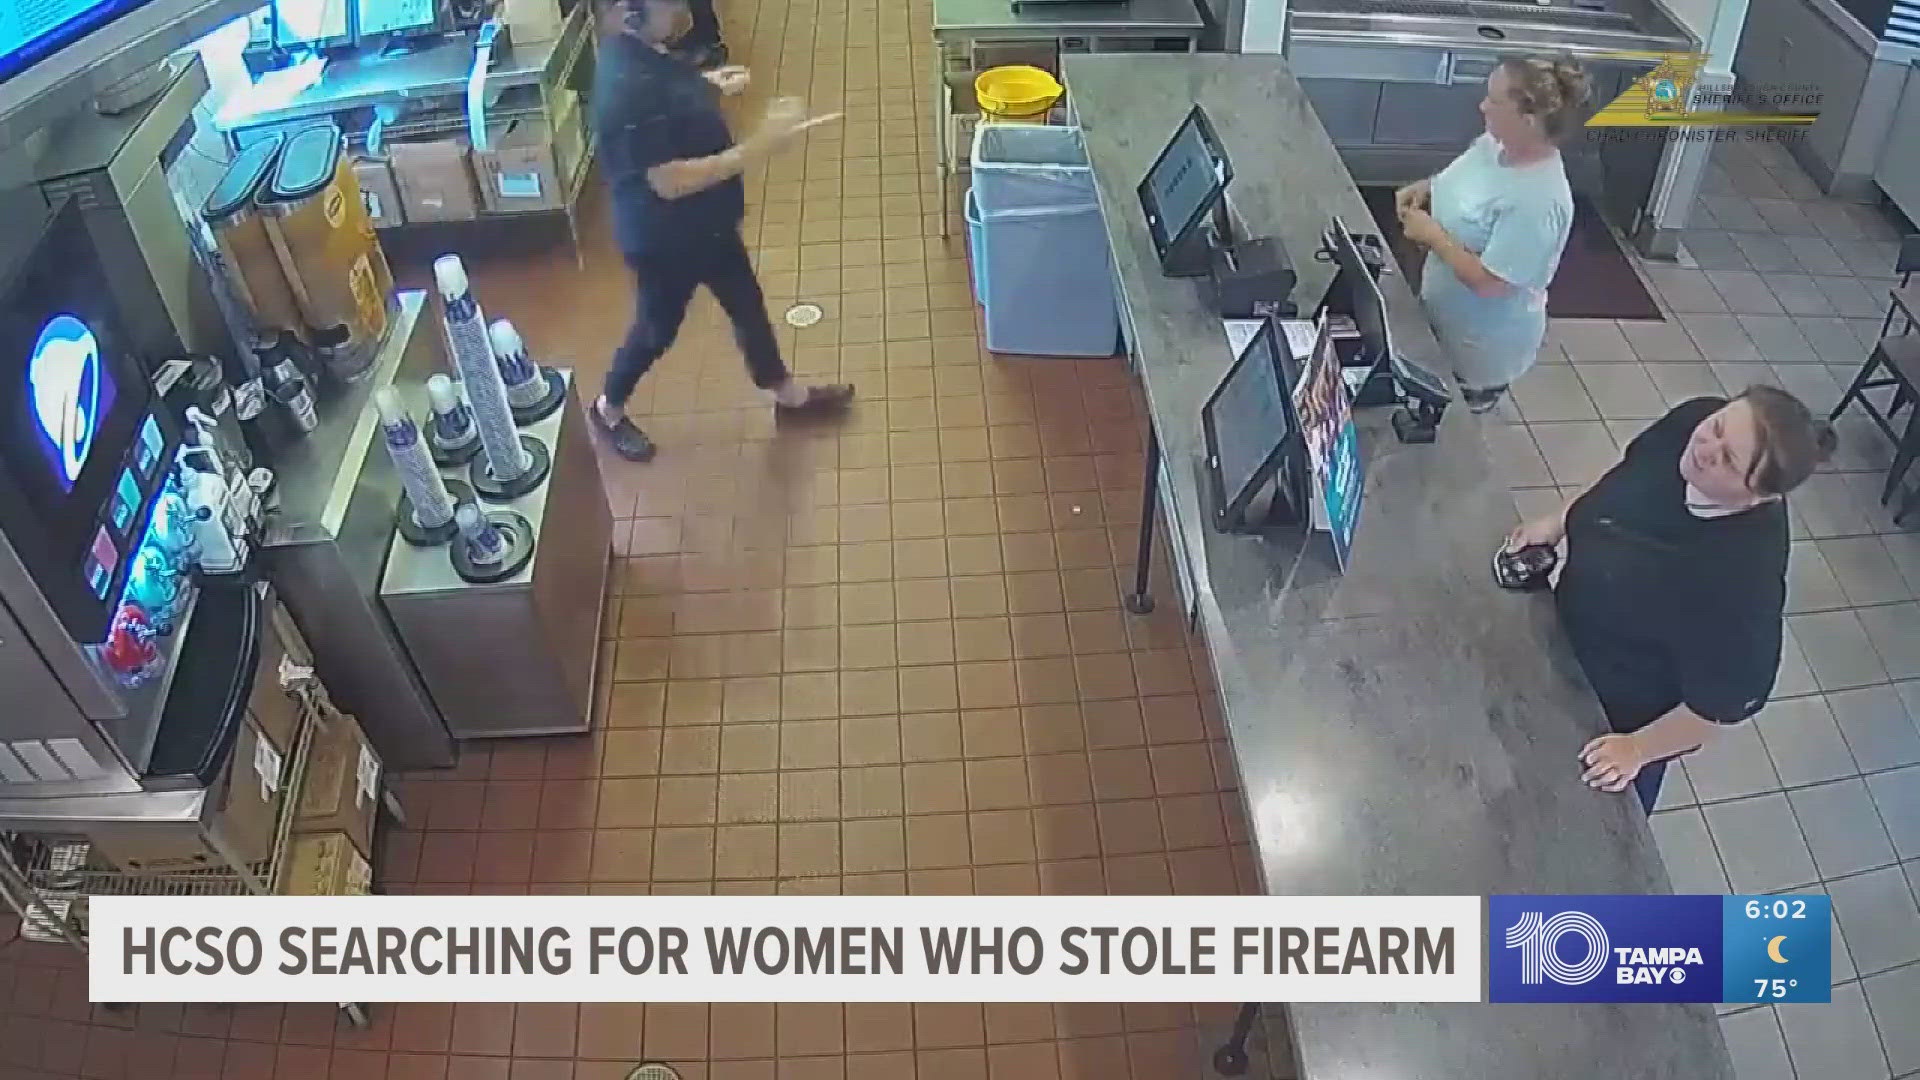 The Hillsborough County Sheriff's Office says this happened on April 19 at a Taco Bell in Valrico.